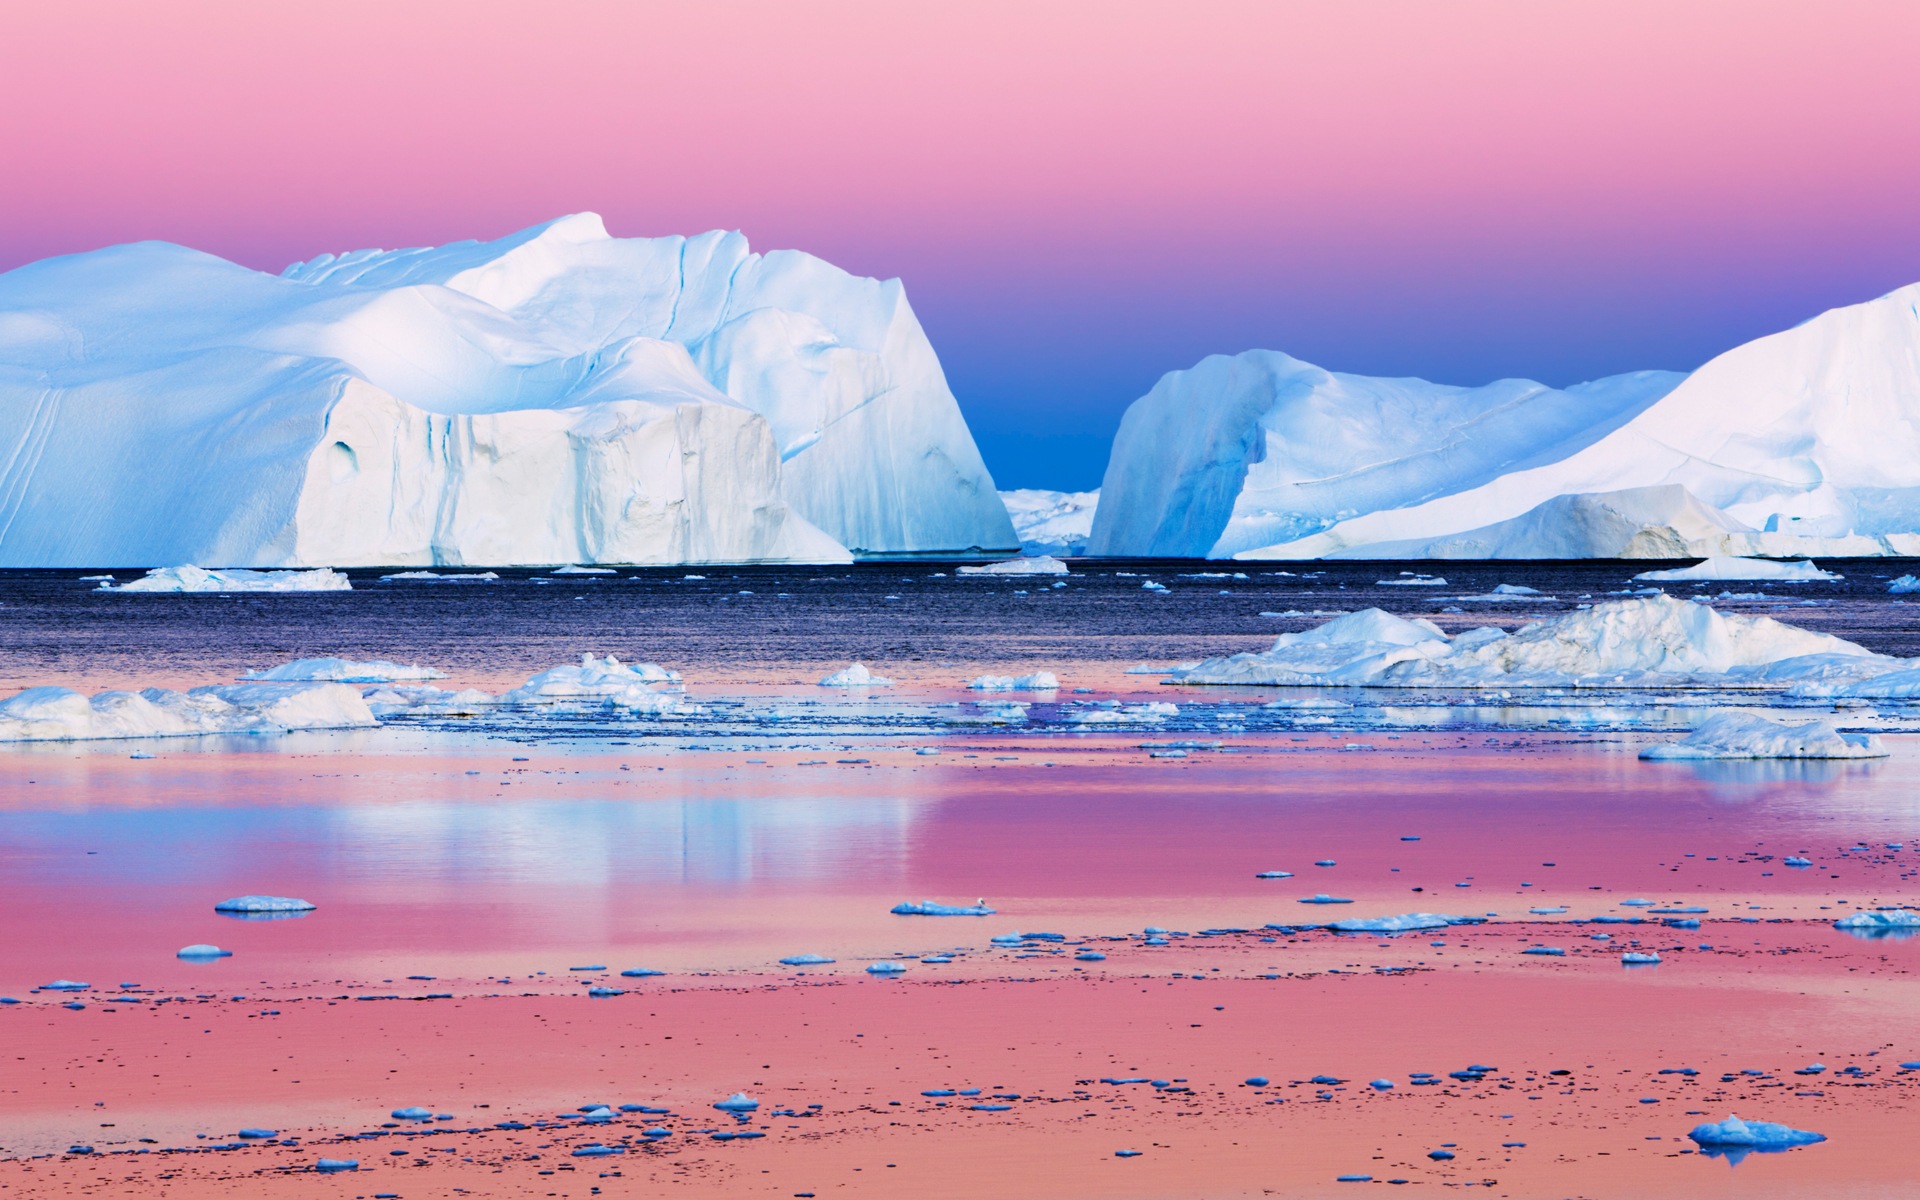 Windows 8 Wallpapers: Arctic, the nature ecological landscape, arctic animals #7 - 1920x1200